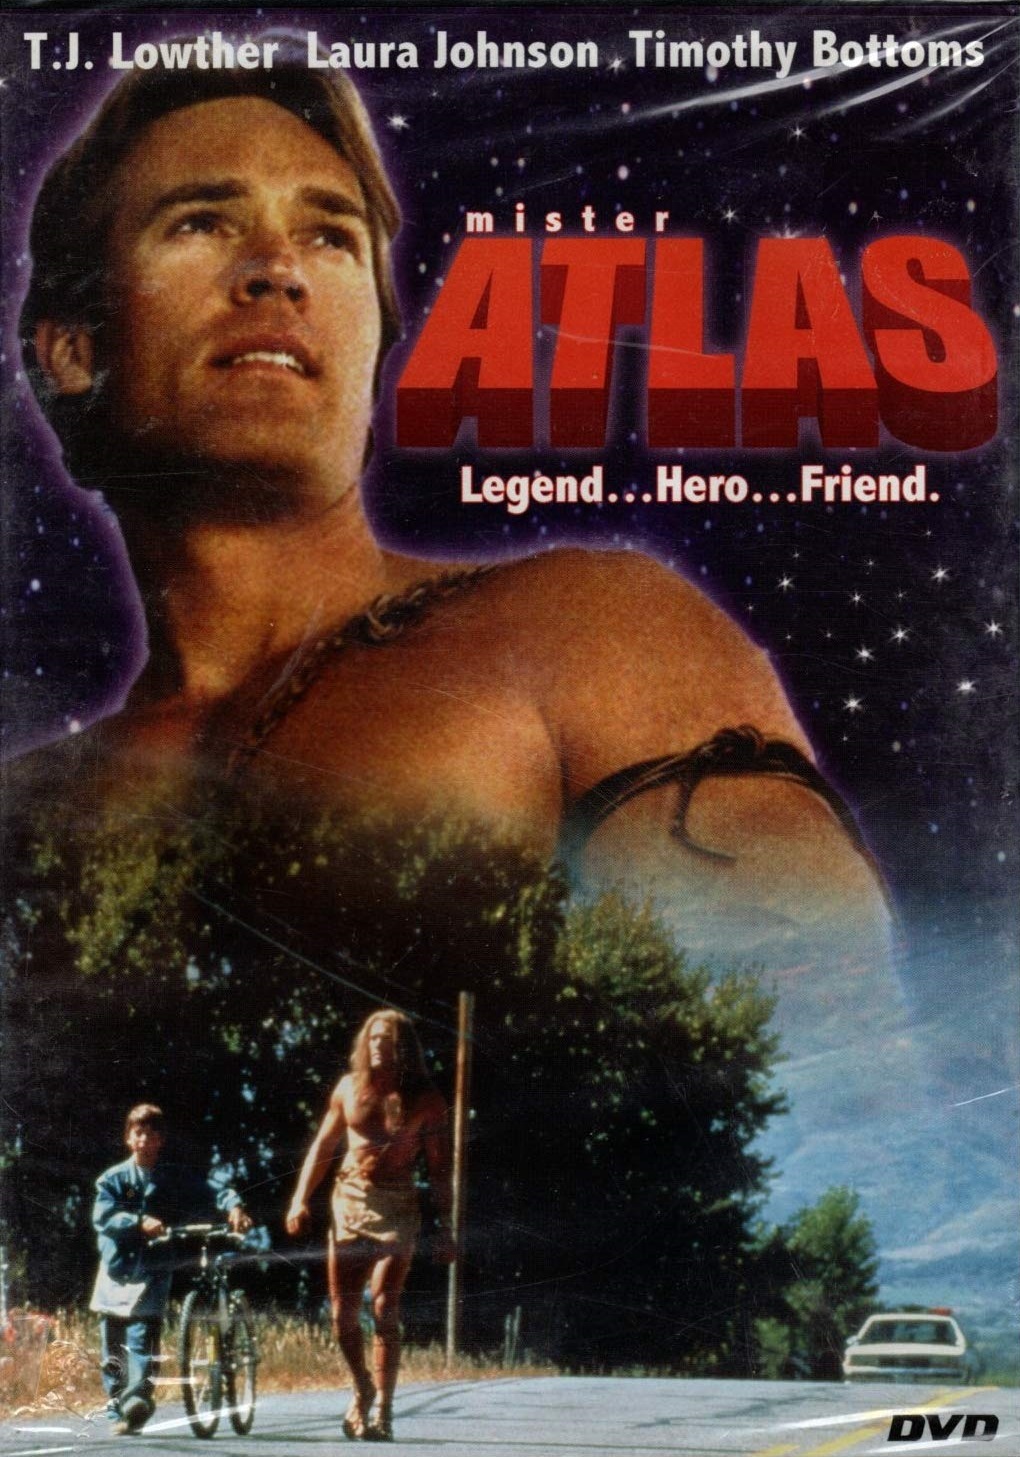 Mr. Atlas (1997) starring T.J. Lowther on DVD on DVD